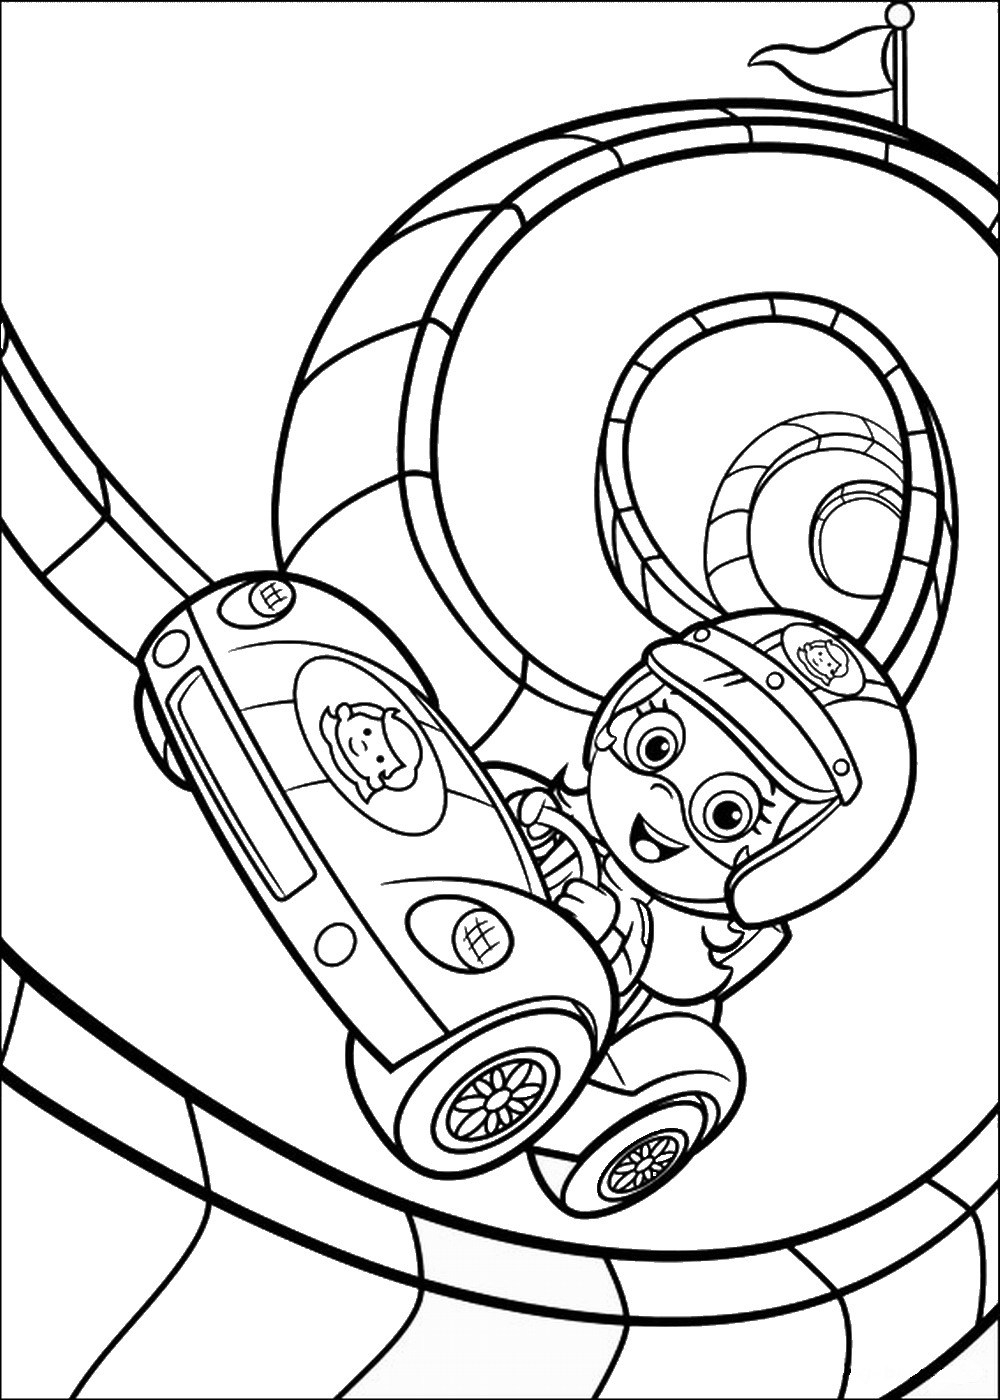 Gumby Coloring Pages Bubble Guppies Coloring Bubble Guppies Coloring Pages On Coloring